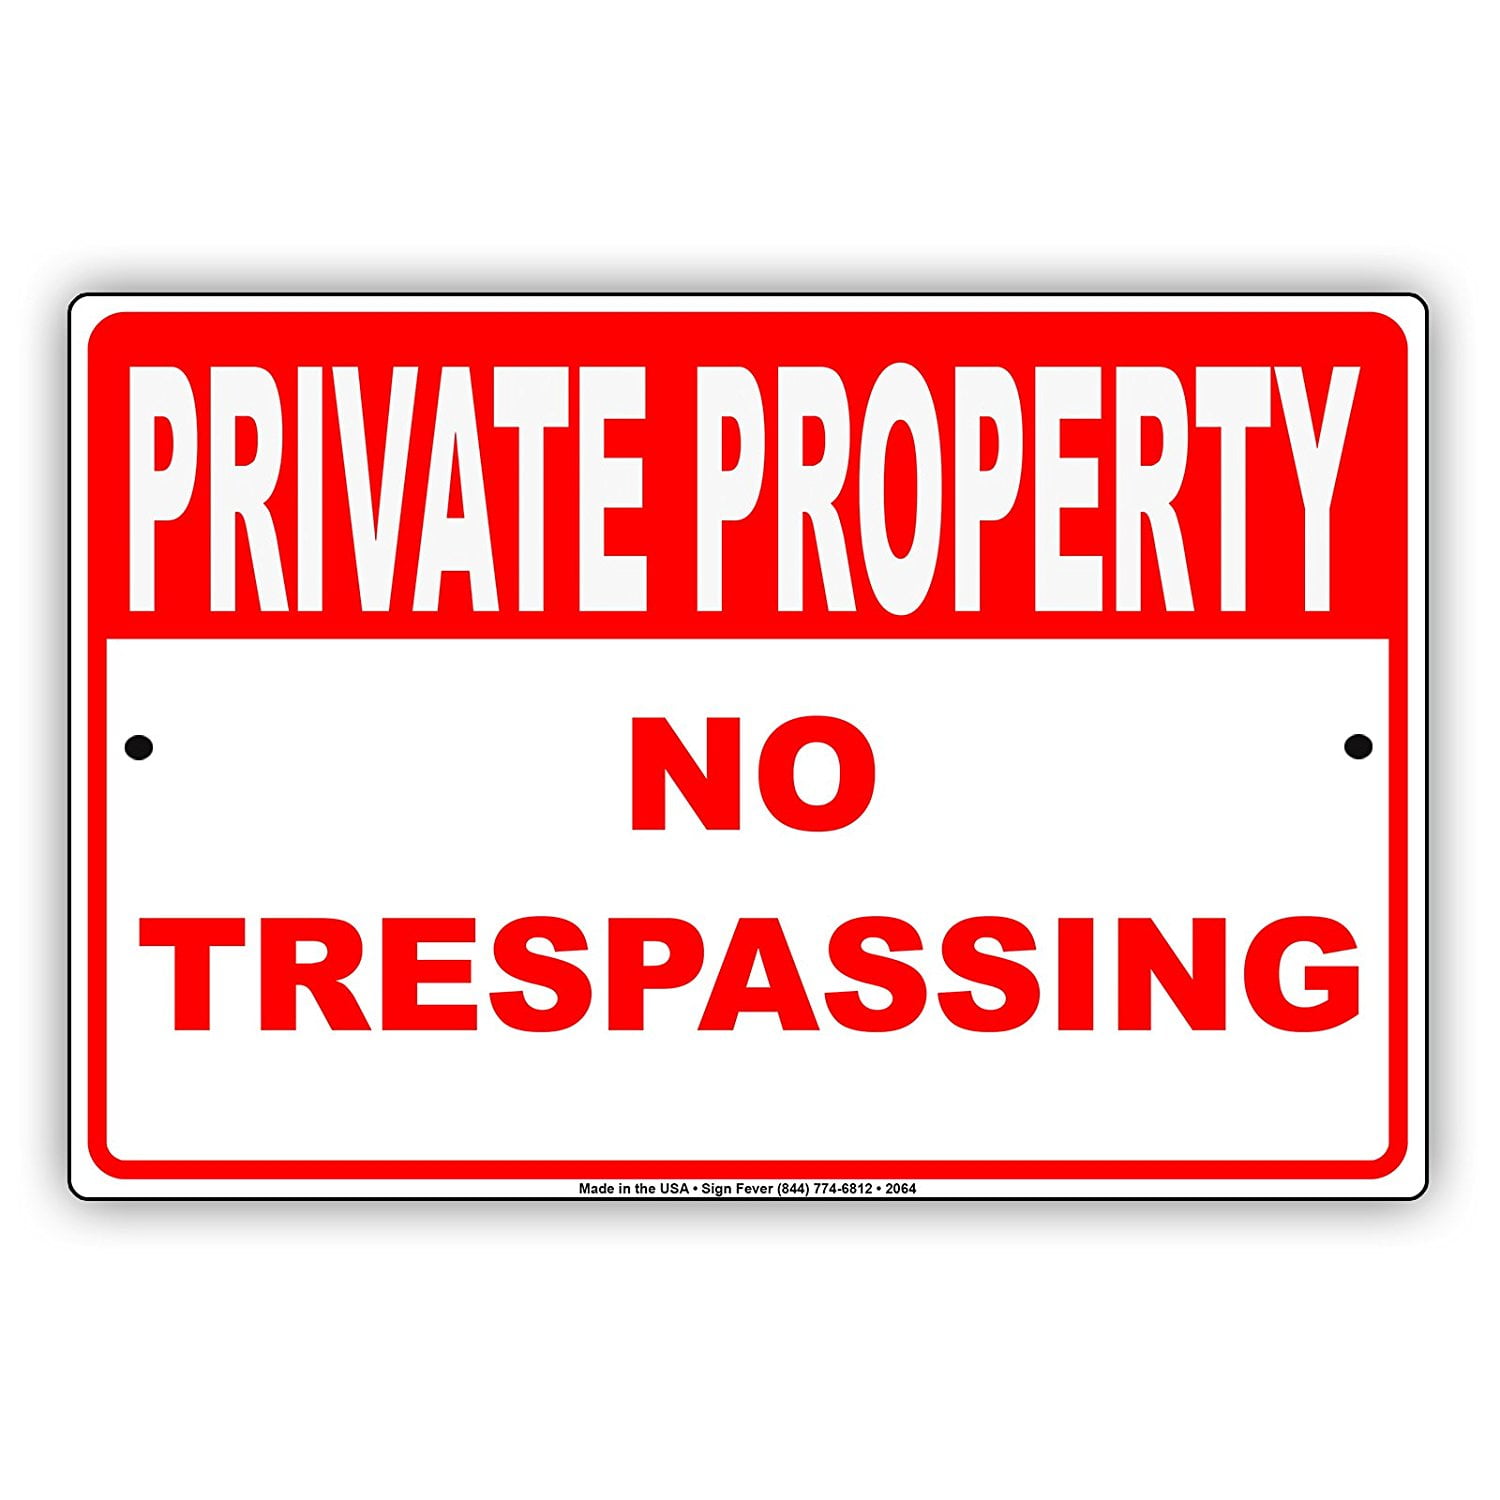 Property is not allowed. No Trespassing. No Trespassing sign. No Trespassing перевод. Печать allowed.